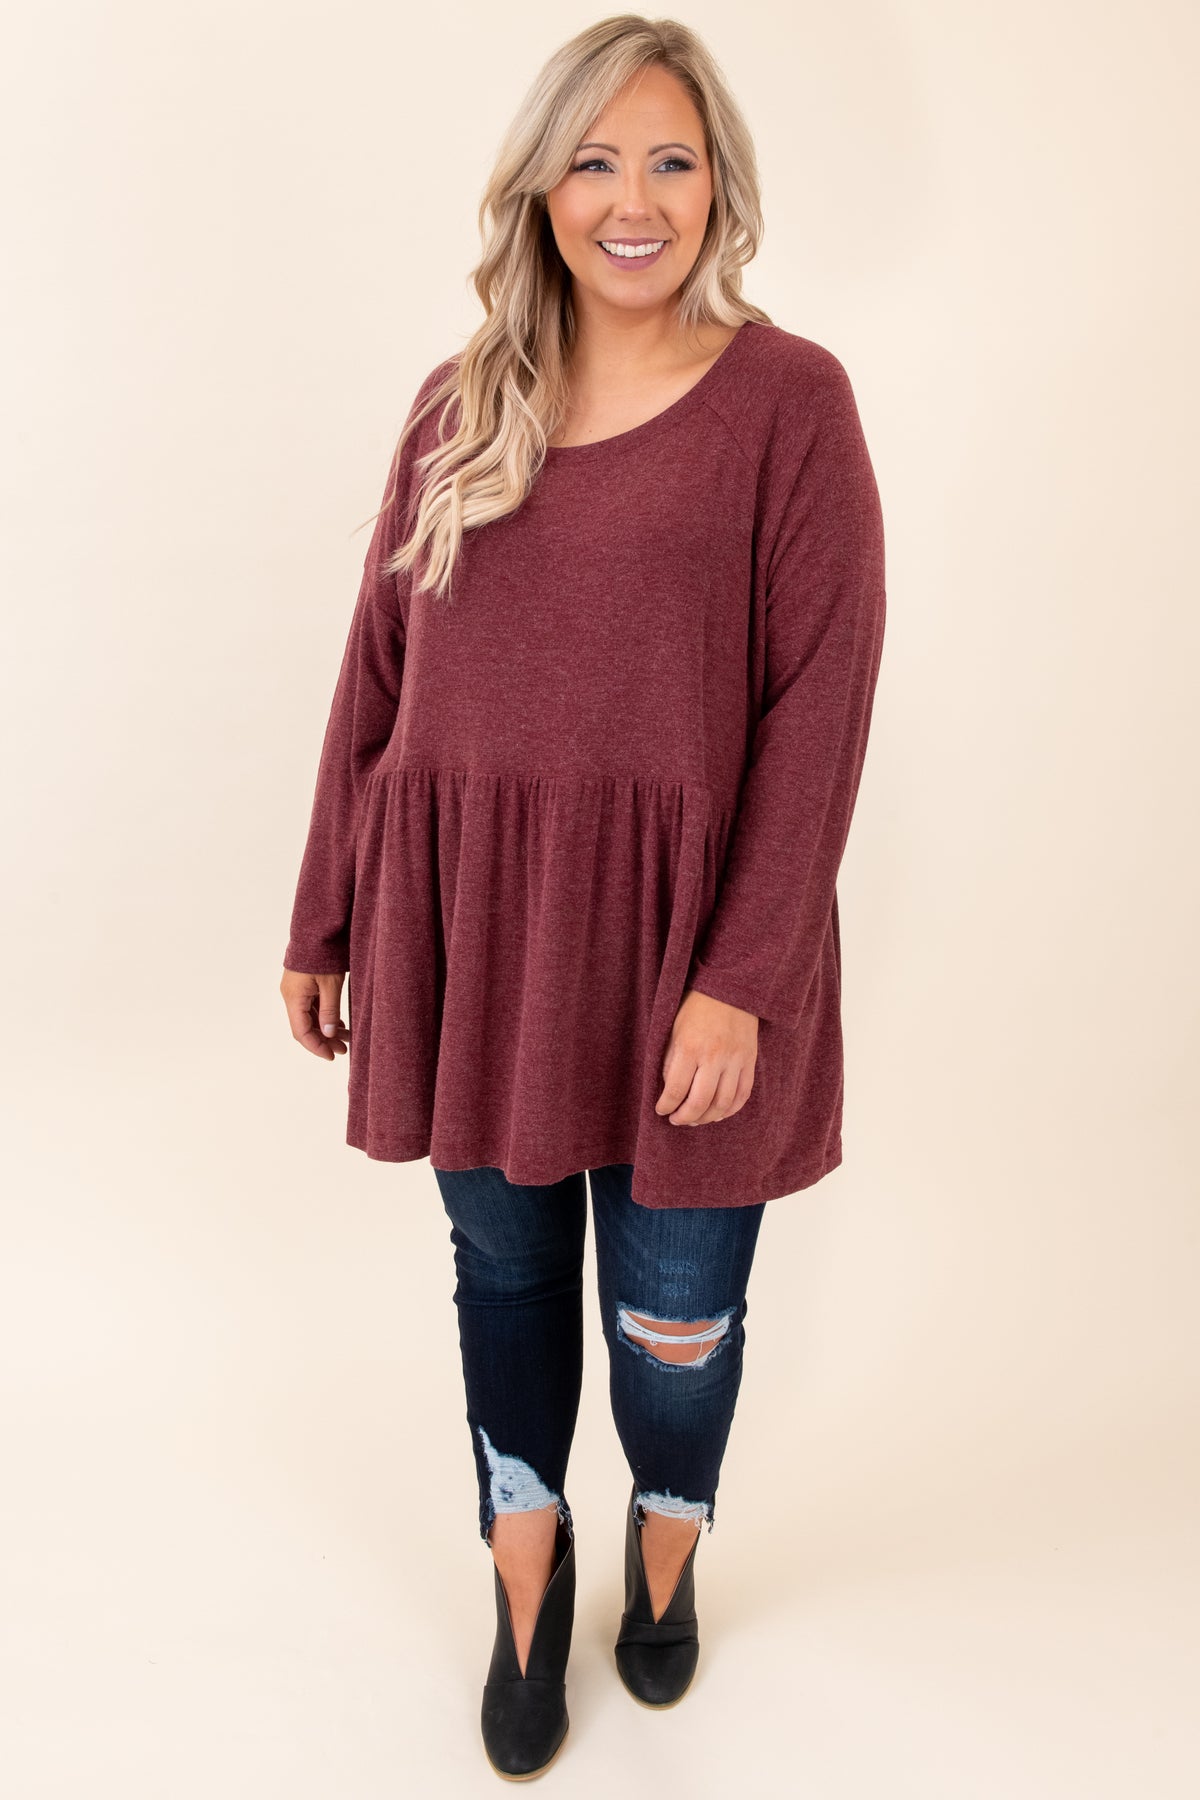 Just Own It Top, Burgundy – Chic Soul